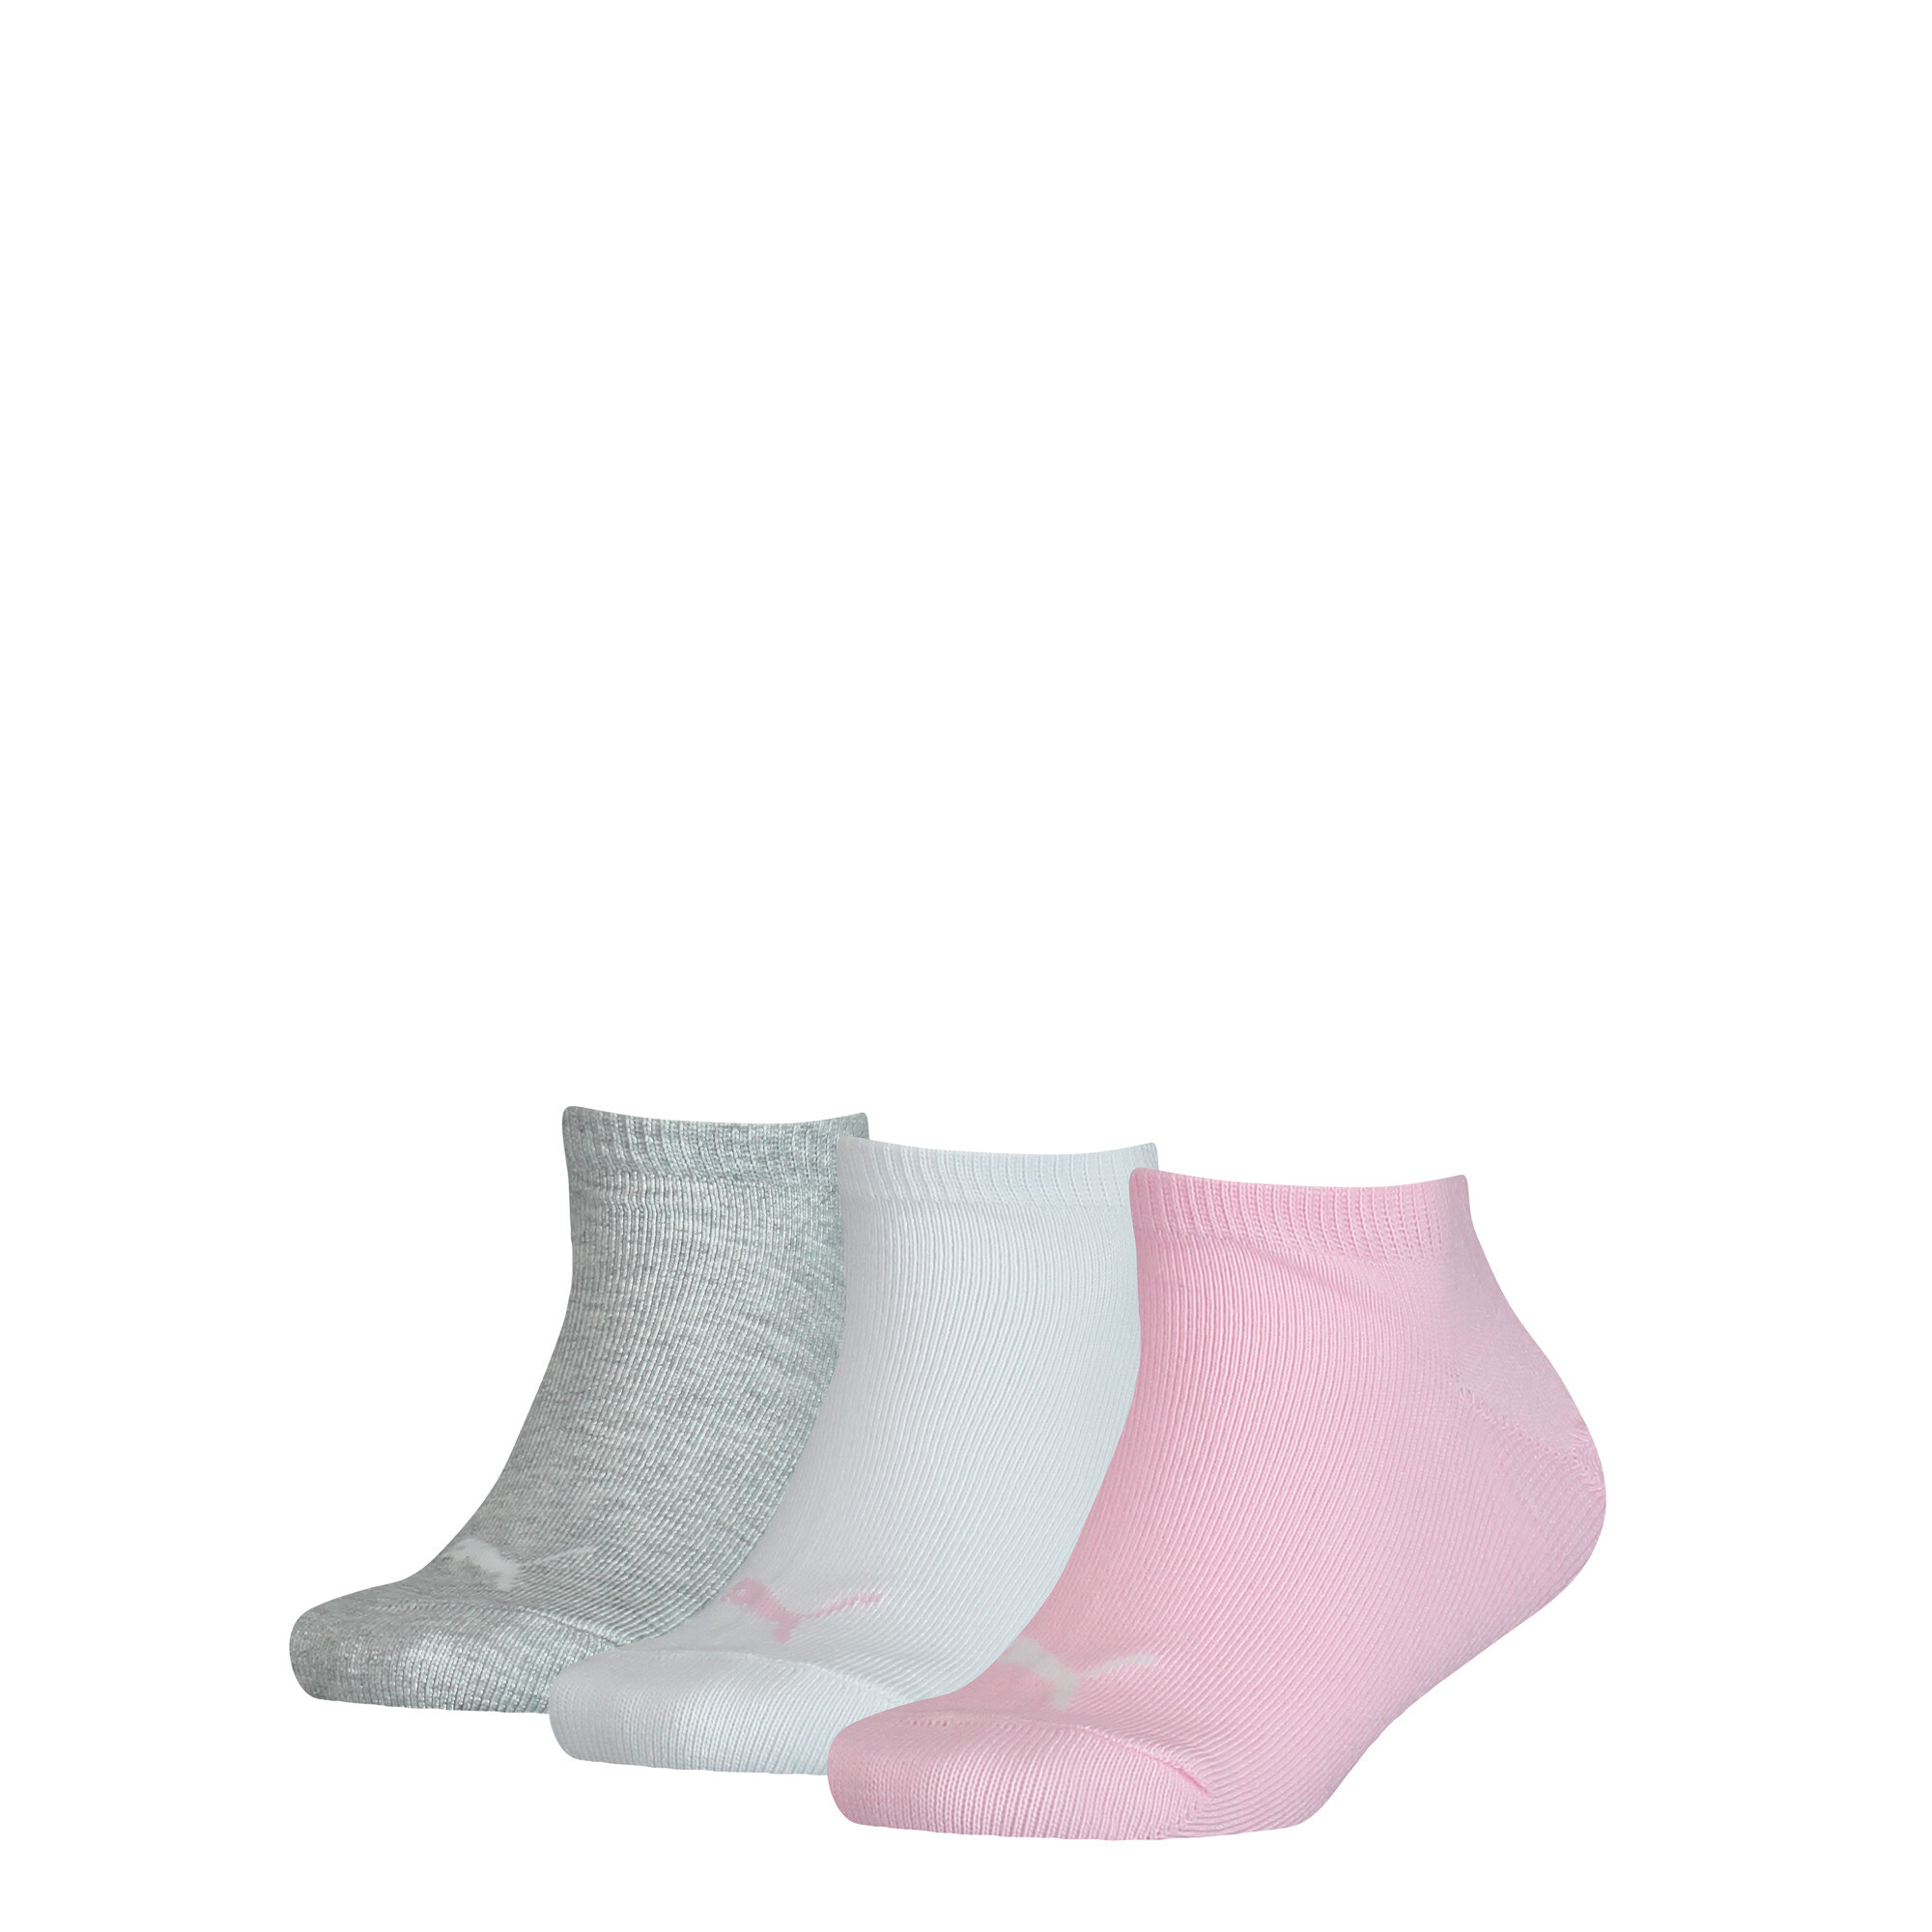 Kids' PUMA Invisible Socks 3 Pack In Rose Water, Size 35-38